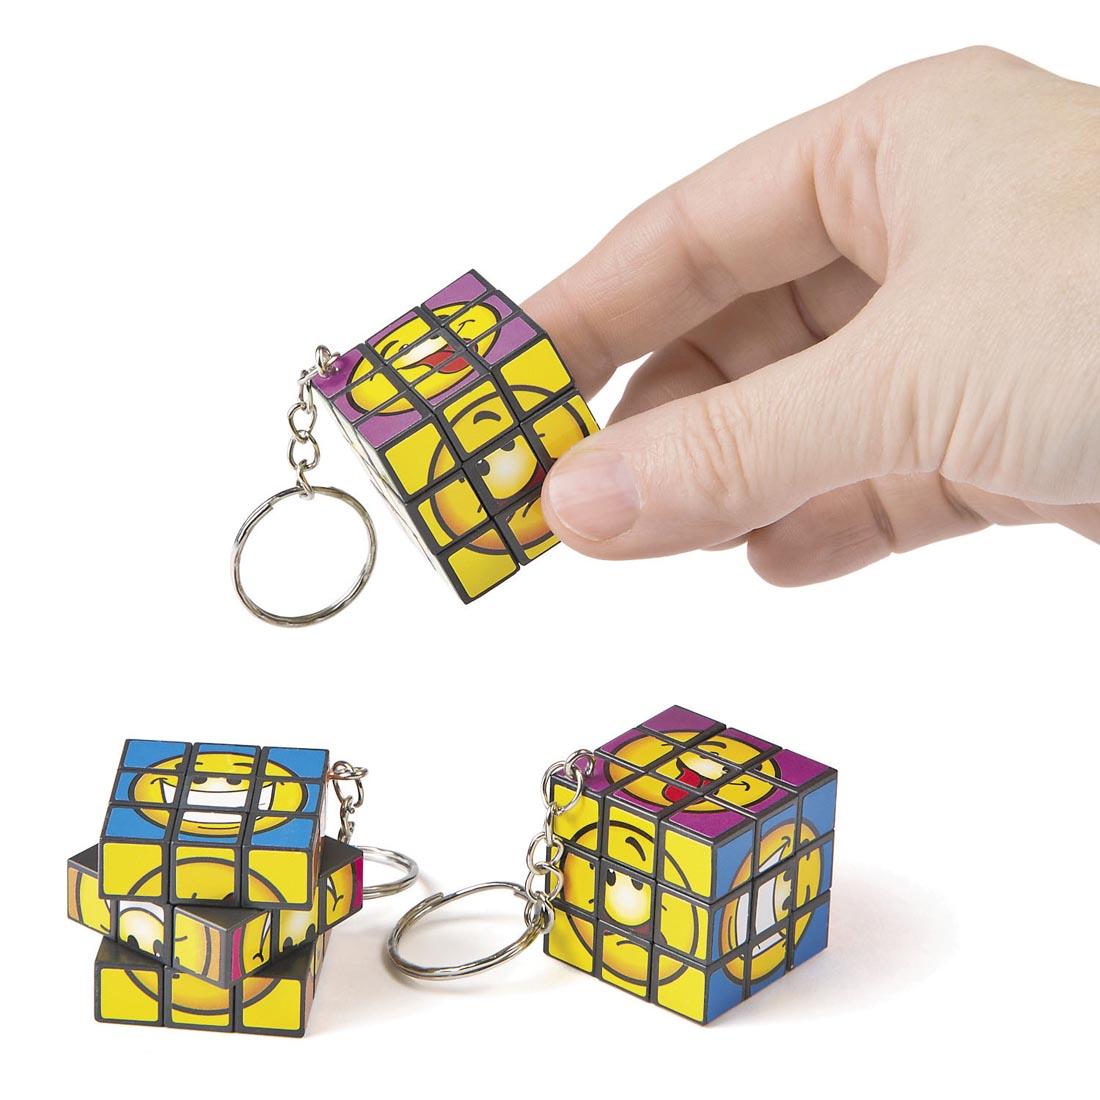 three Mini Magic Cube Puzzle Key Chains by Fun Express with a hand holding one of them